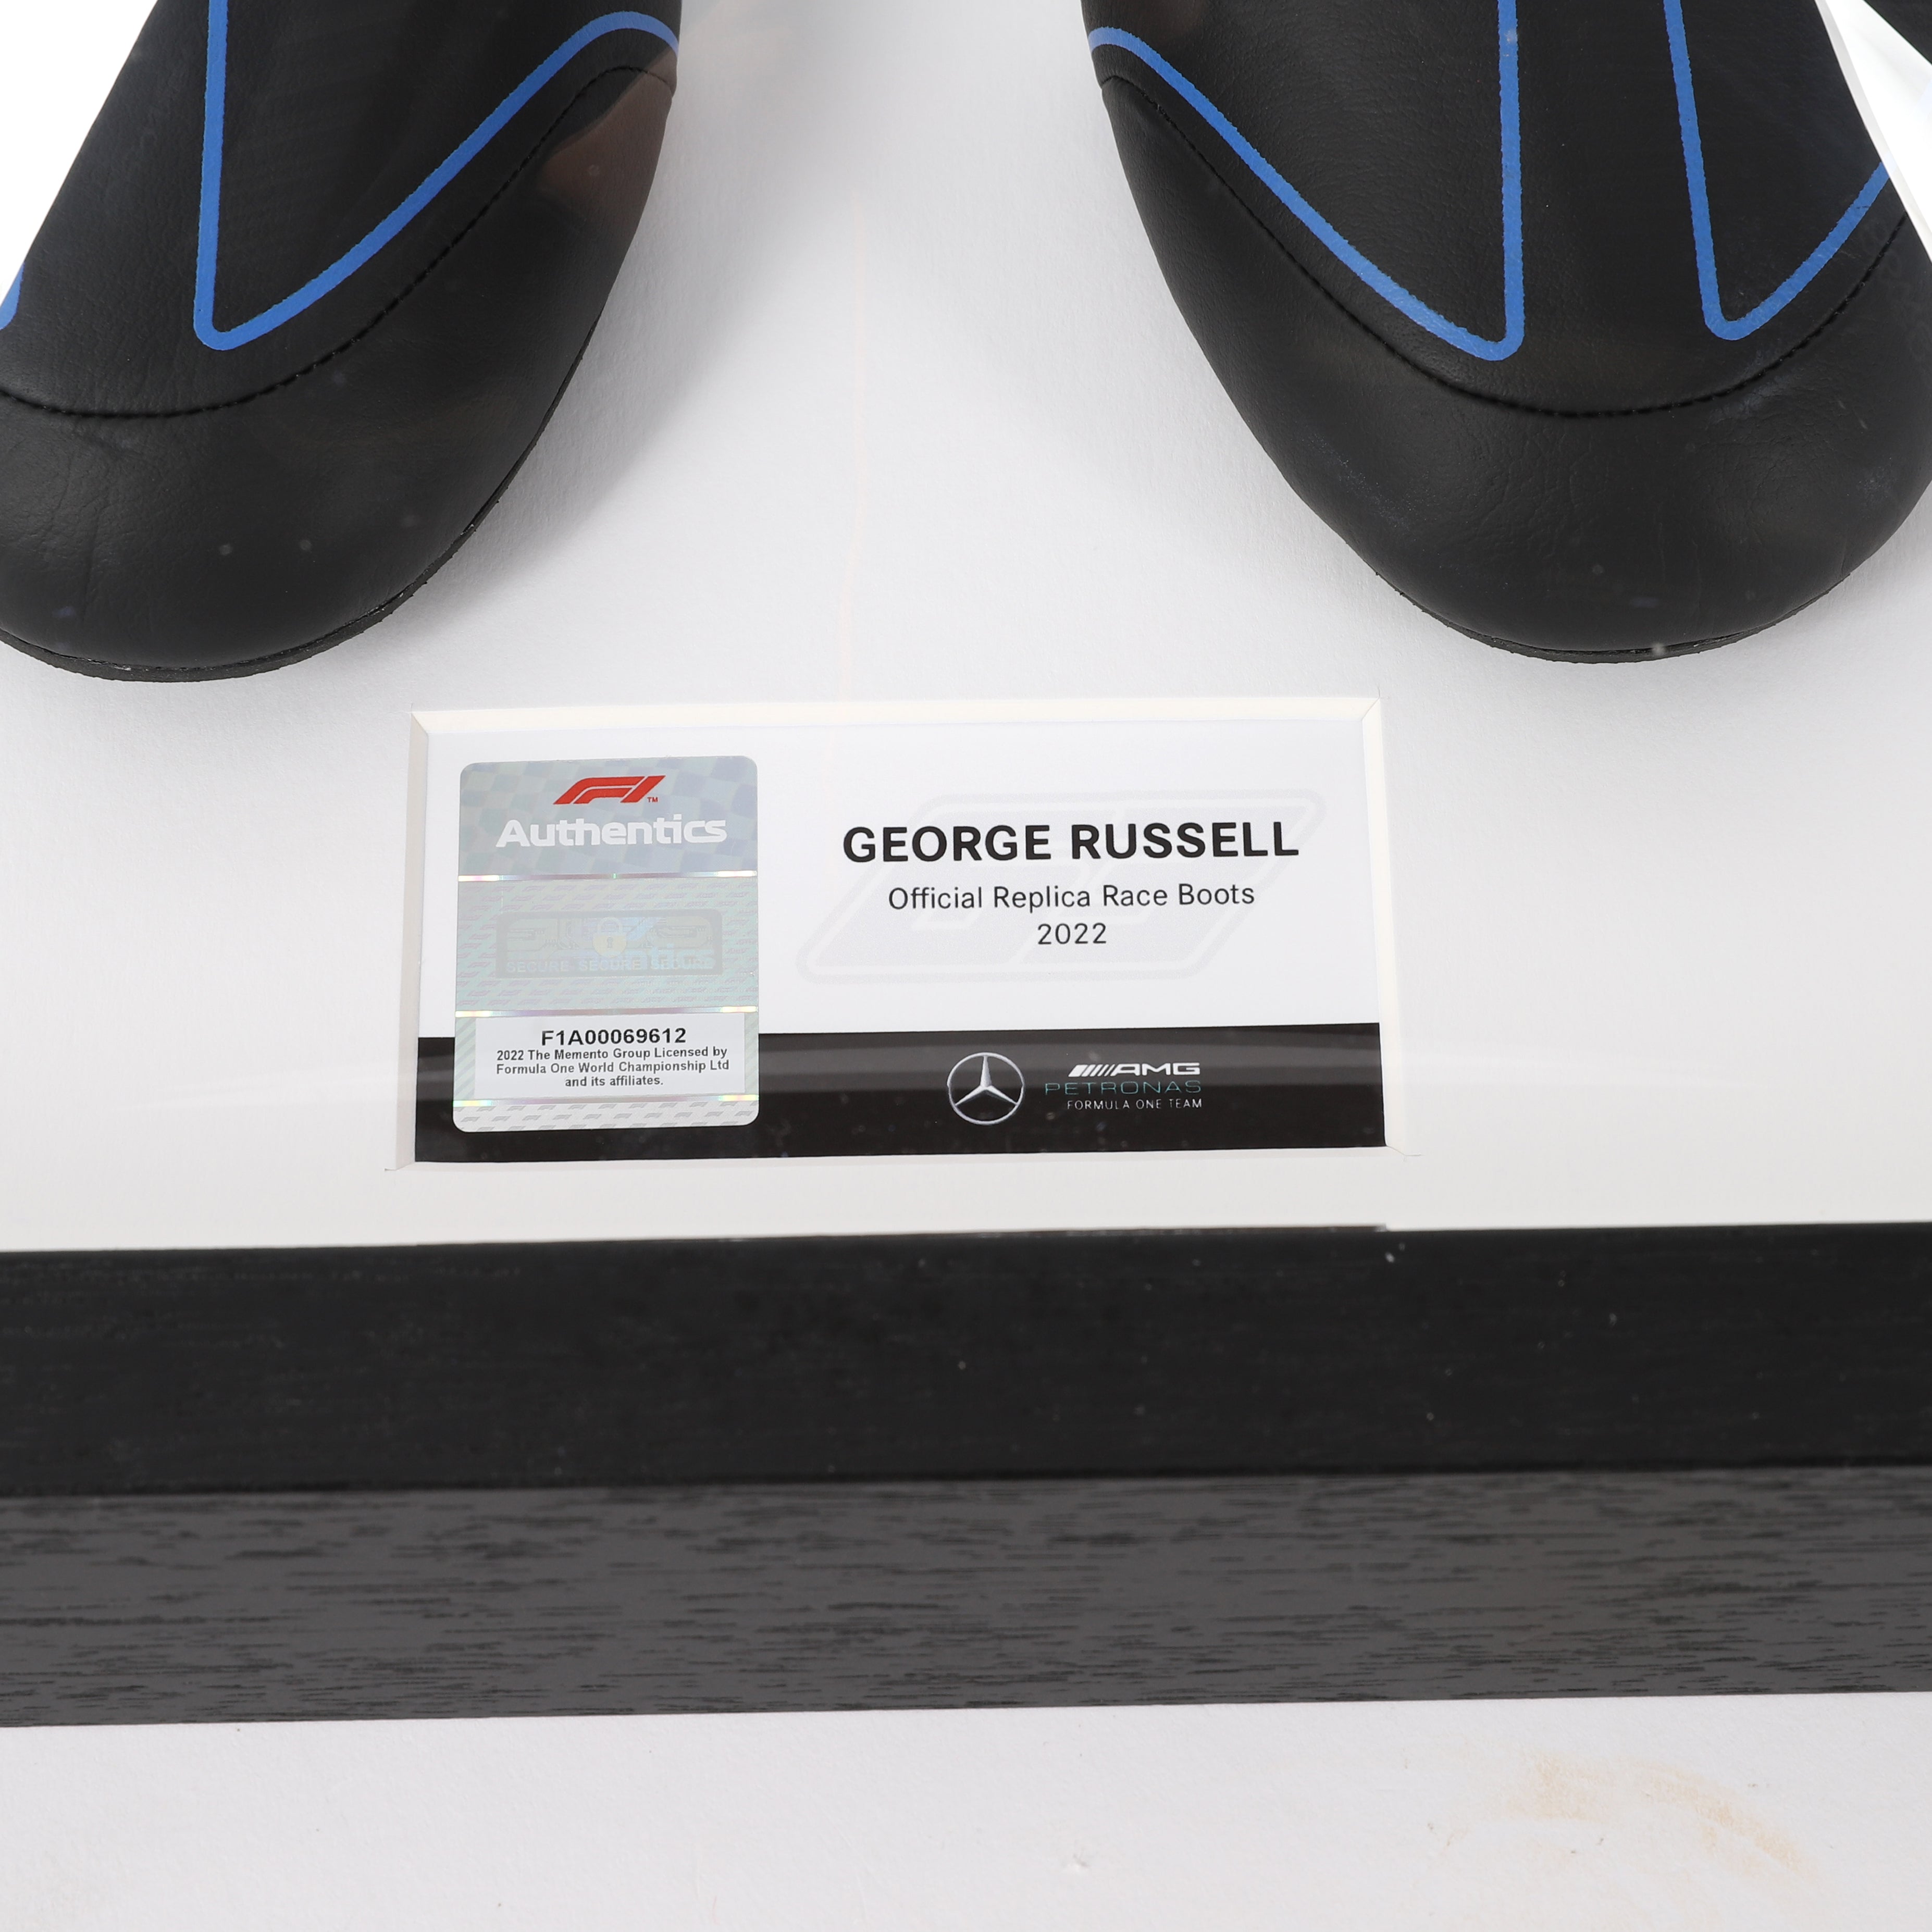 George Russell 2022 Replica Mercedes-AMG Petronas F1 Team Race Boots